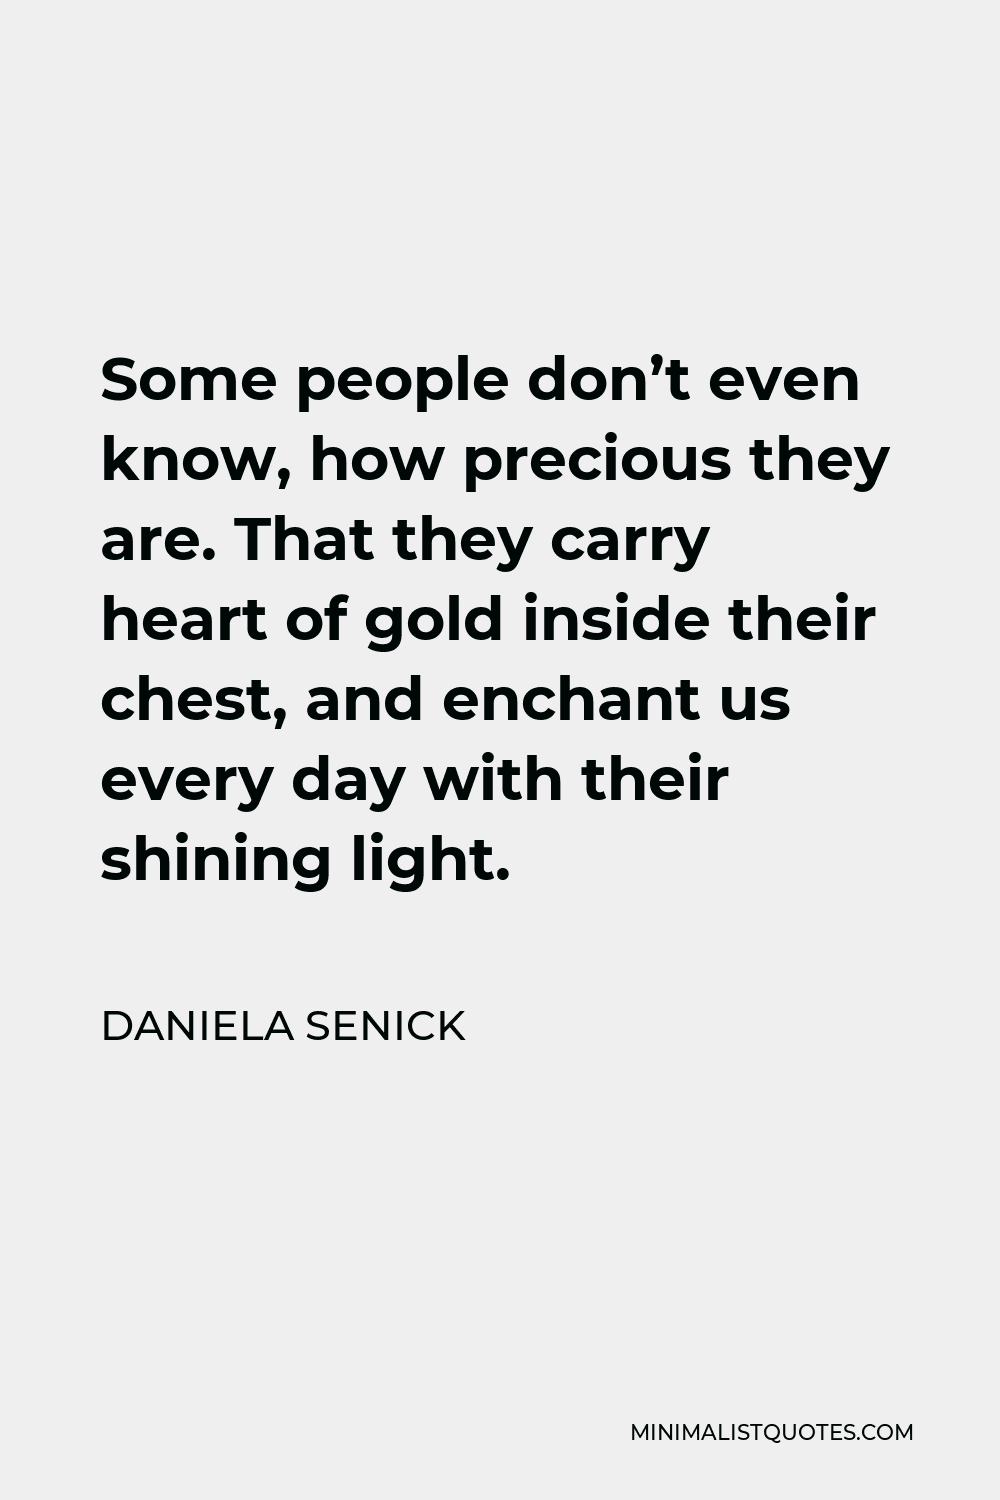 Daniela Senick Quote - Some people don’t even know, how precious they are. That they carry heart of gold inside their chest, and enchant us every day with their shining light.